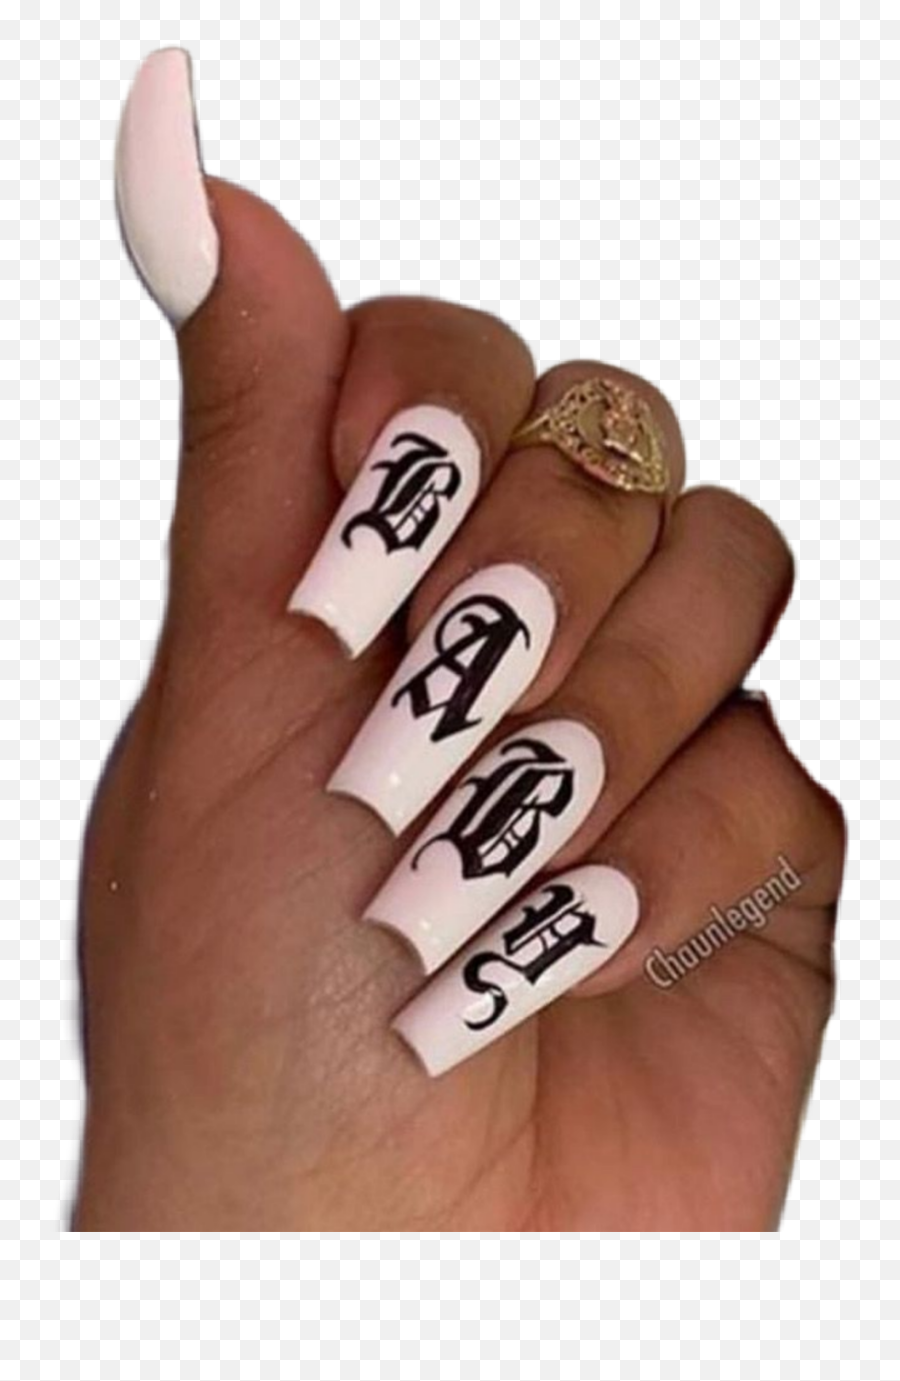 Largest Collection Of Free - Toedit Mano Stickers Old English Letters On Nails Emoji,Metal Hand Emoji